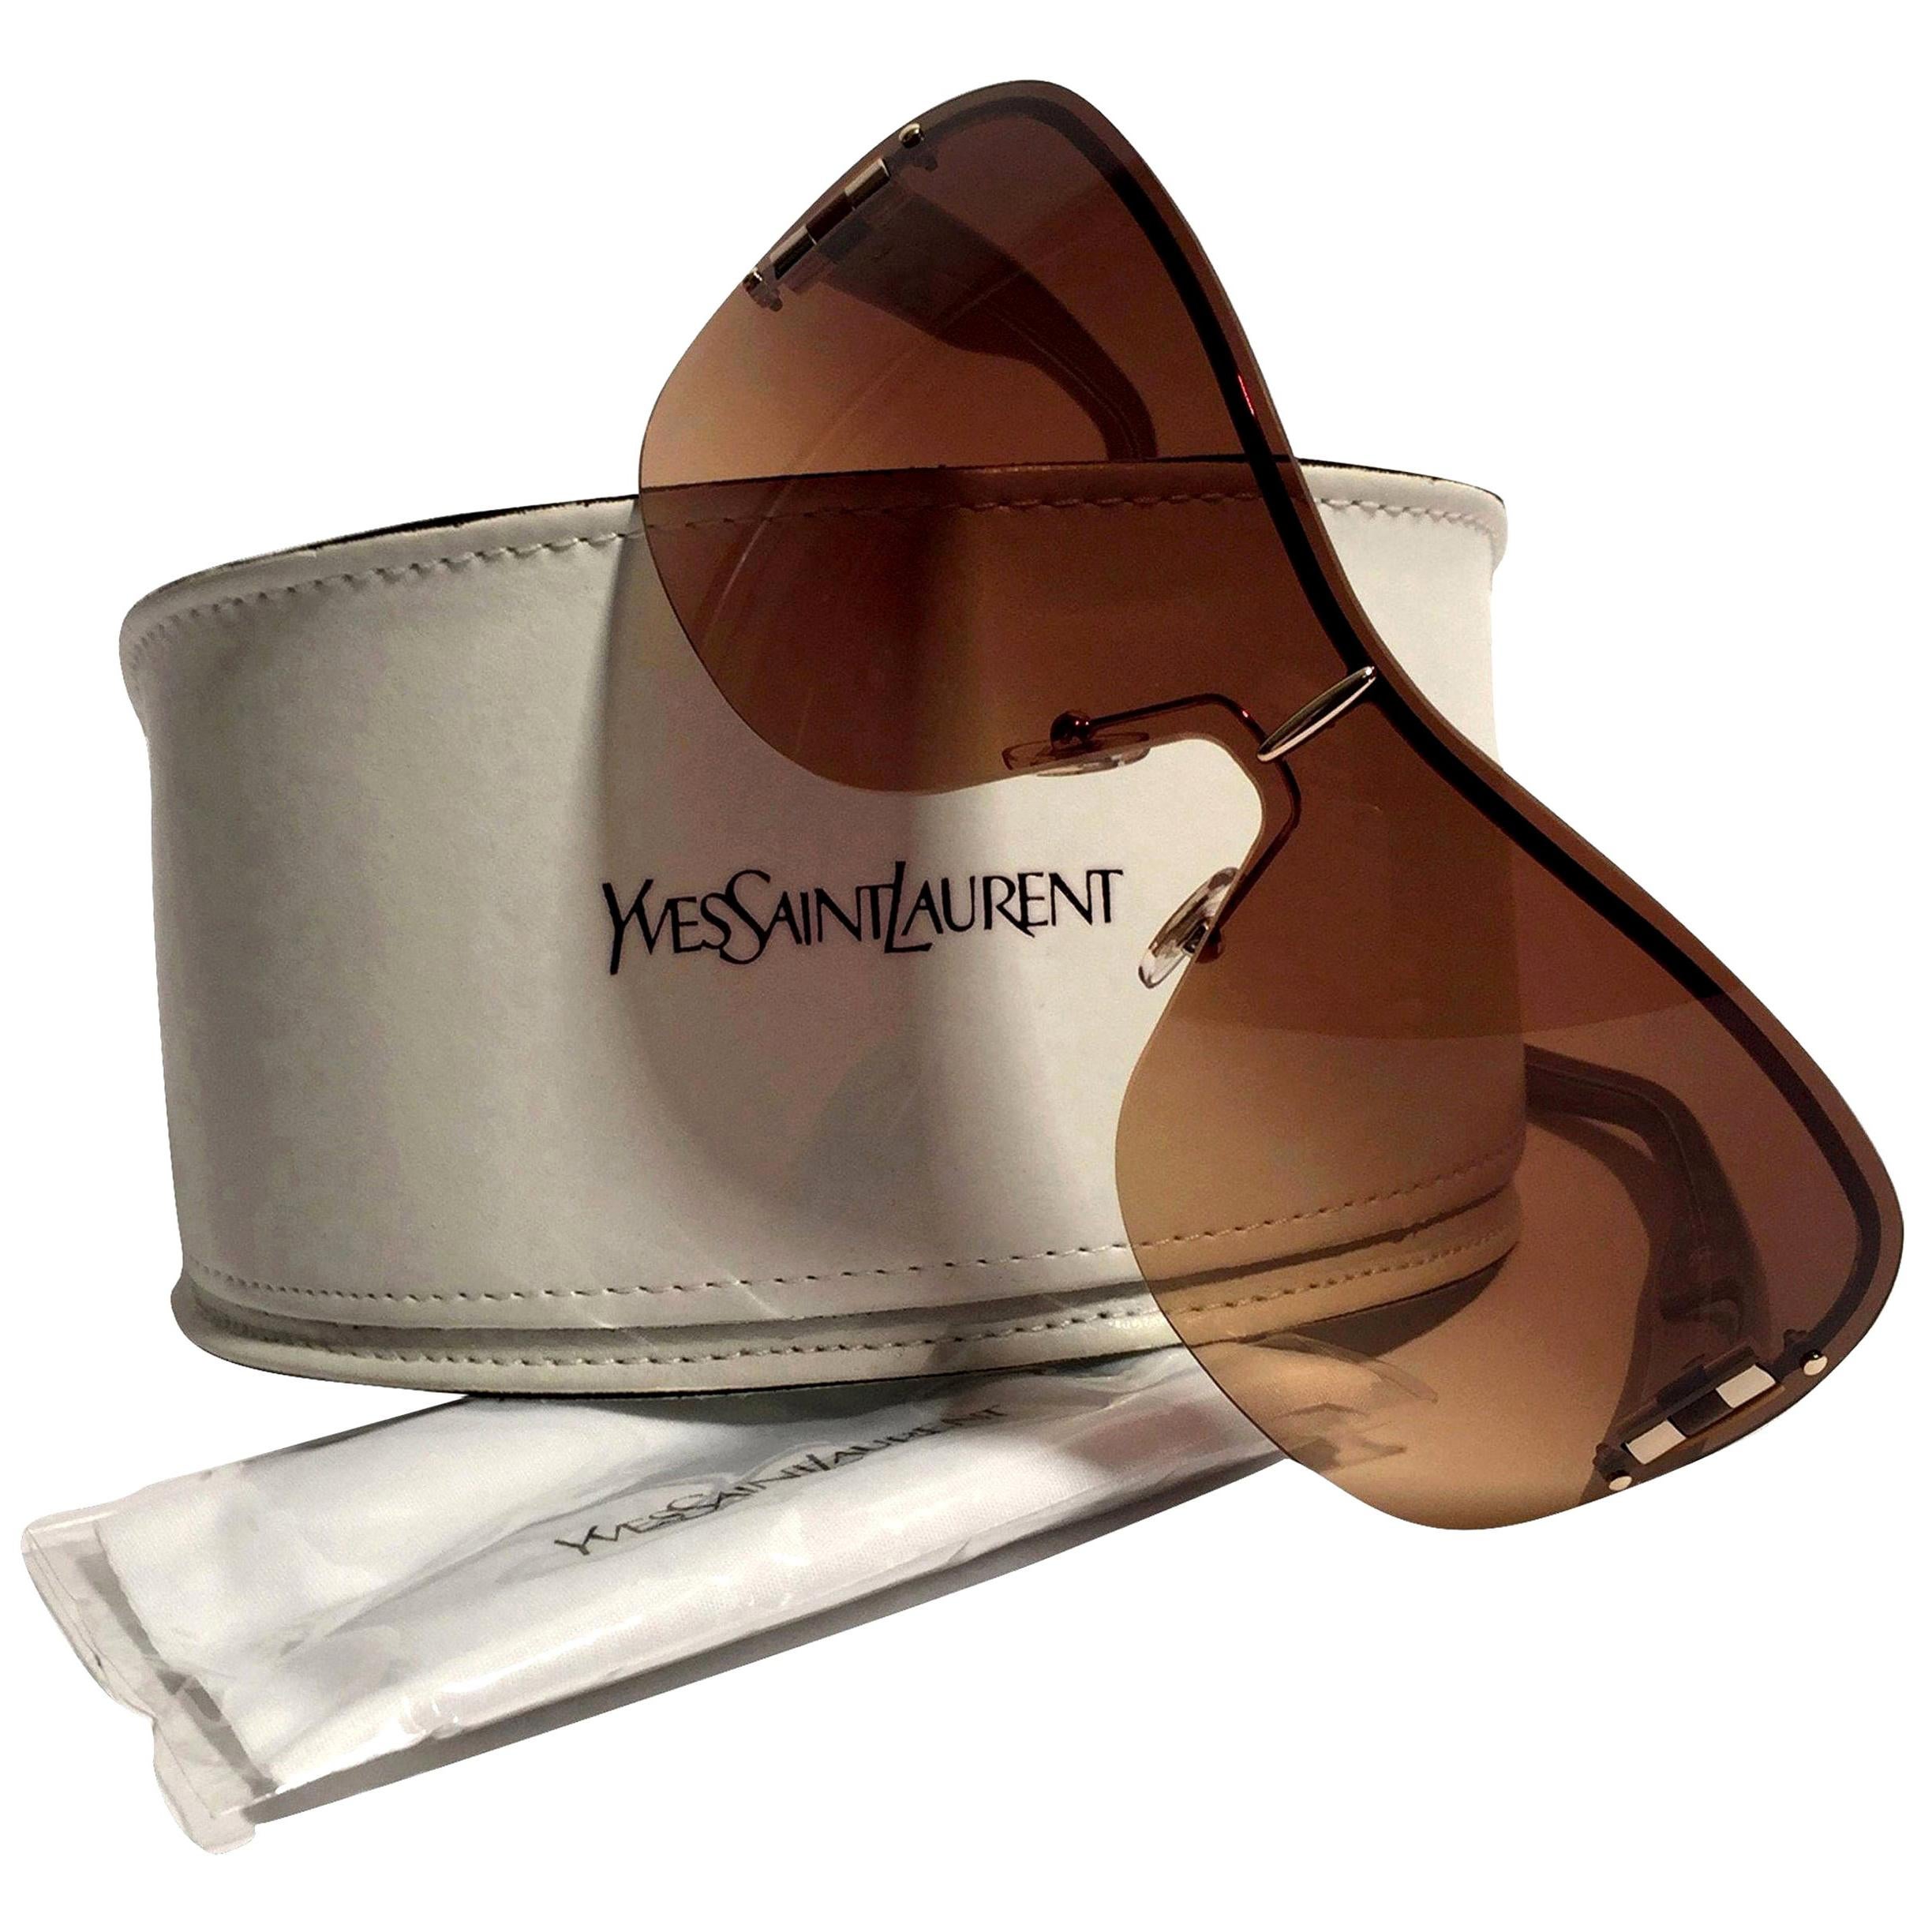 Yves Saint Laurent Sunglasses
Brand New
*Stunning in Camel
* Wraparound Styling
* Super Lightweight
* Gold Hardware
* Made in Italy
* 100% UVA/UVB Protection
* Comes with Case & Tag